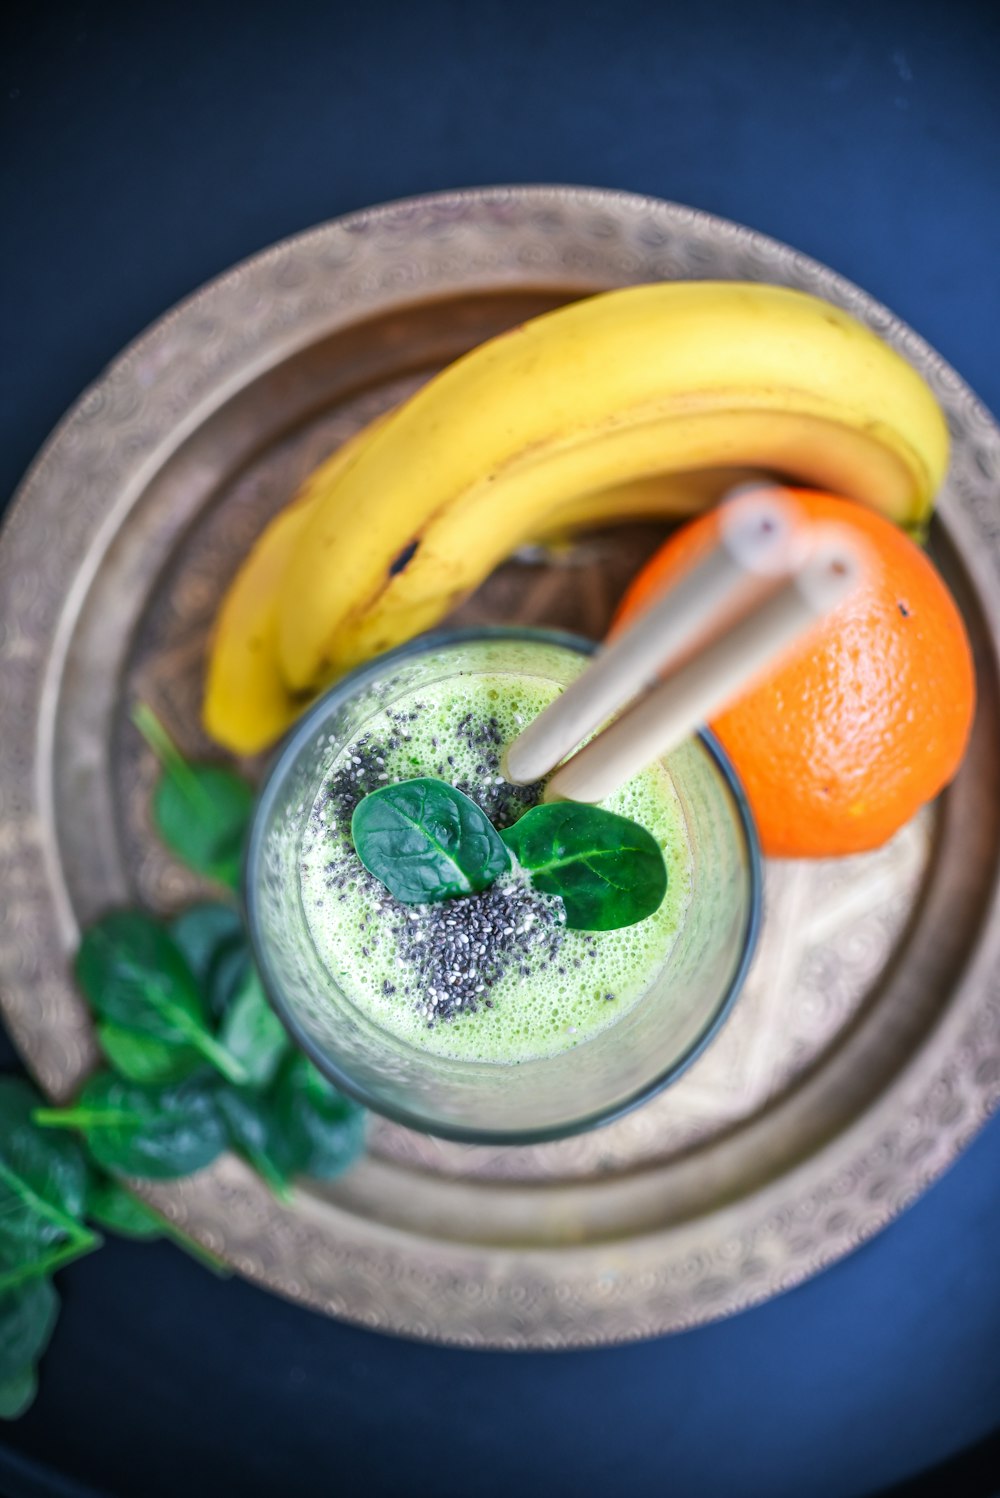 a glass of green smoothie with bananas and oranges